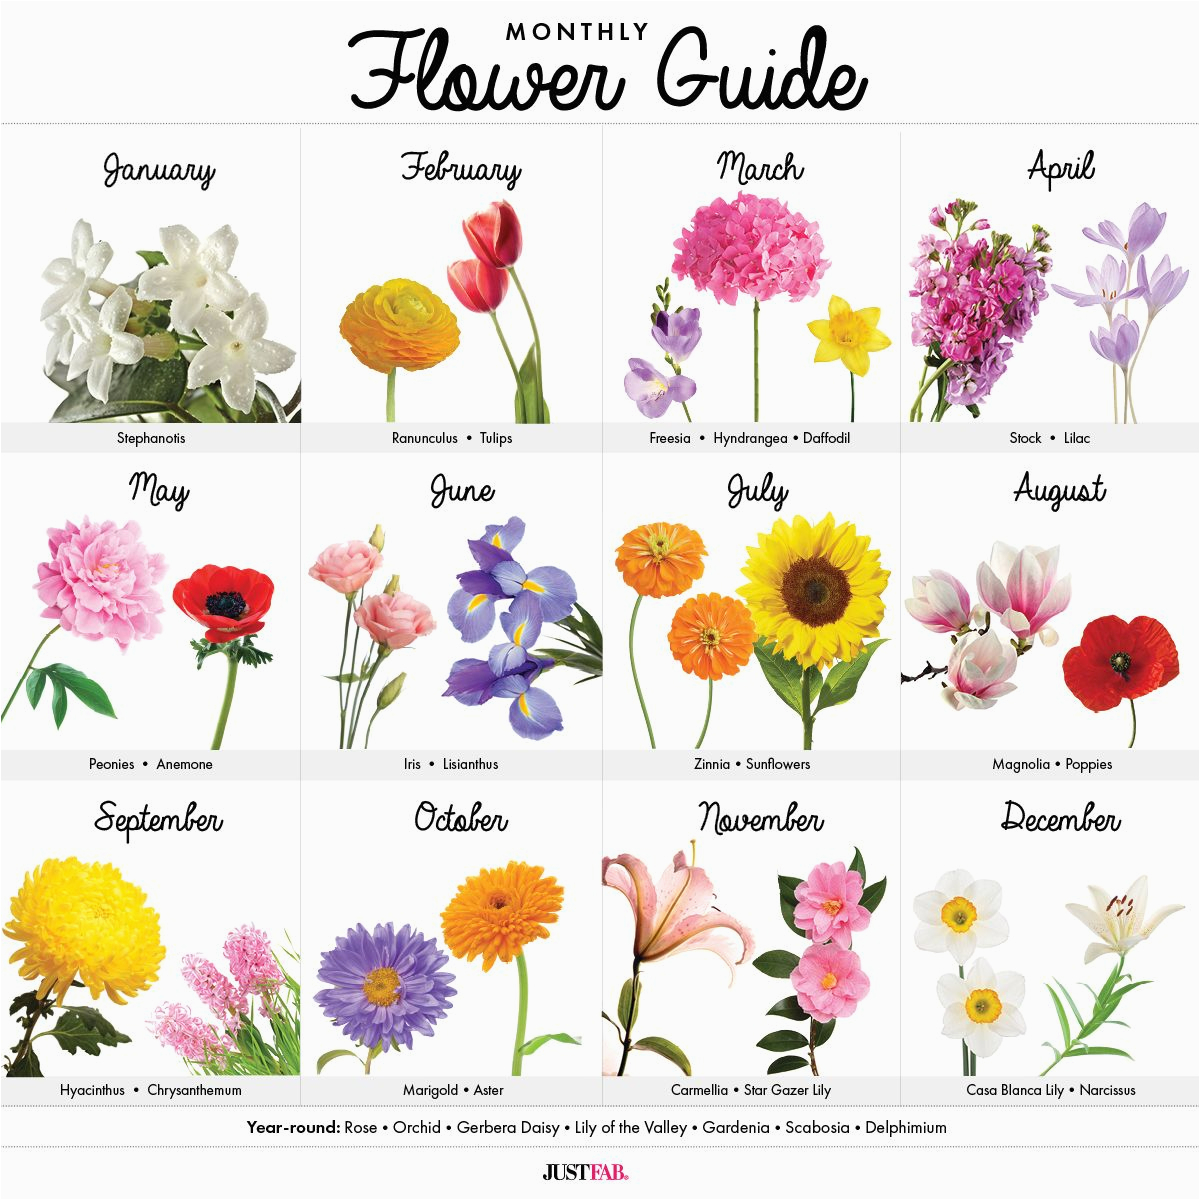 Monthly Birthday Flowers A Visual Guide To Wedding Flowers By Month